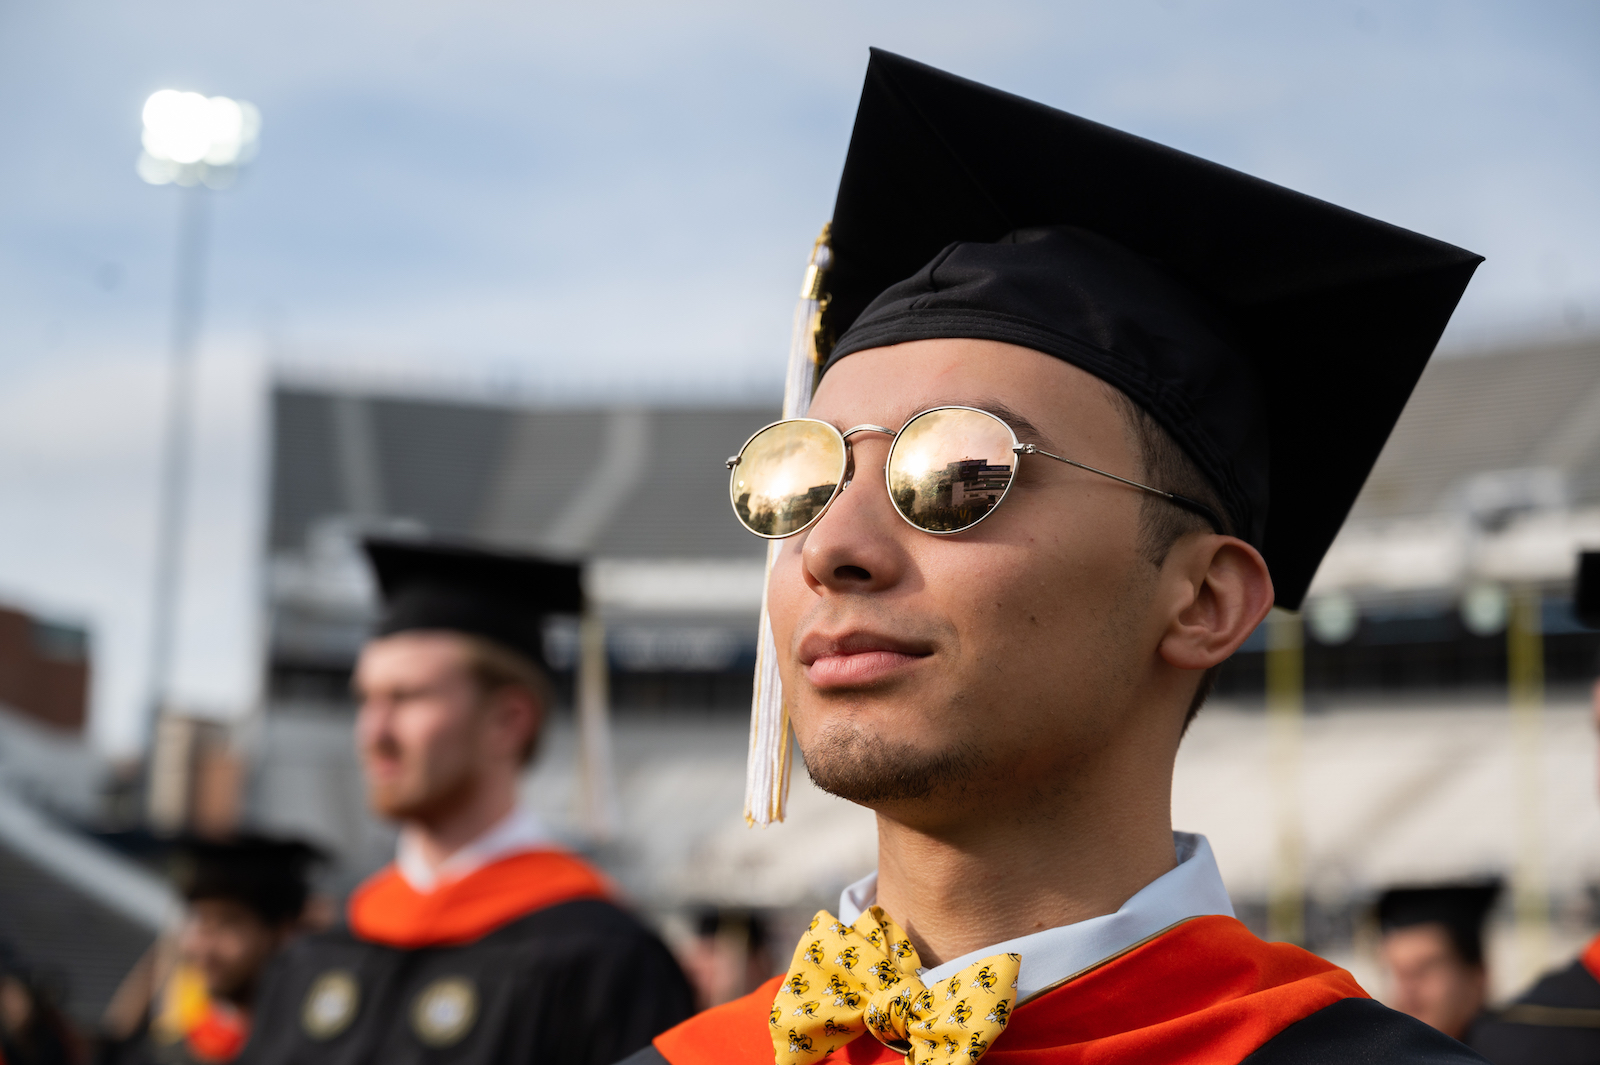 master's candidate wearing sunglasses